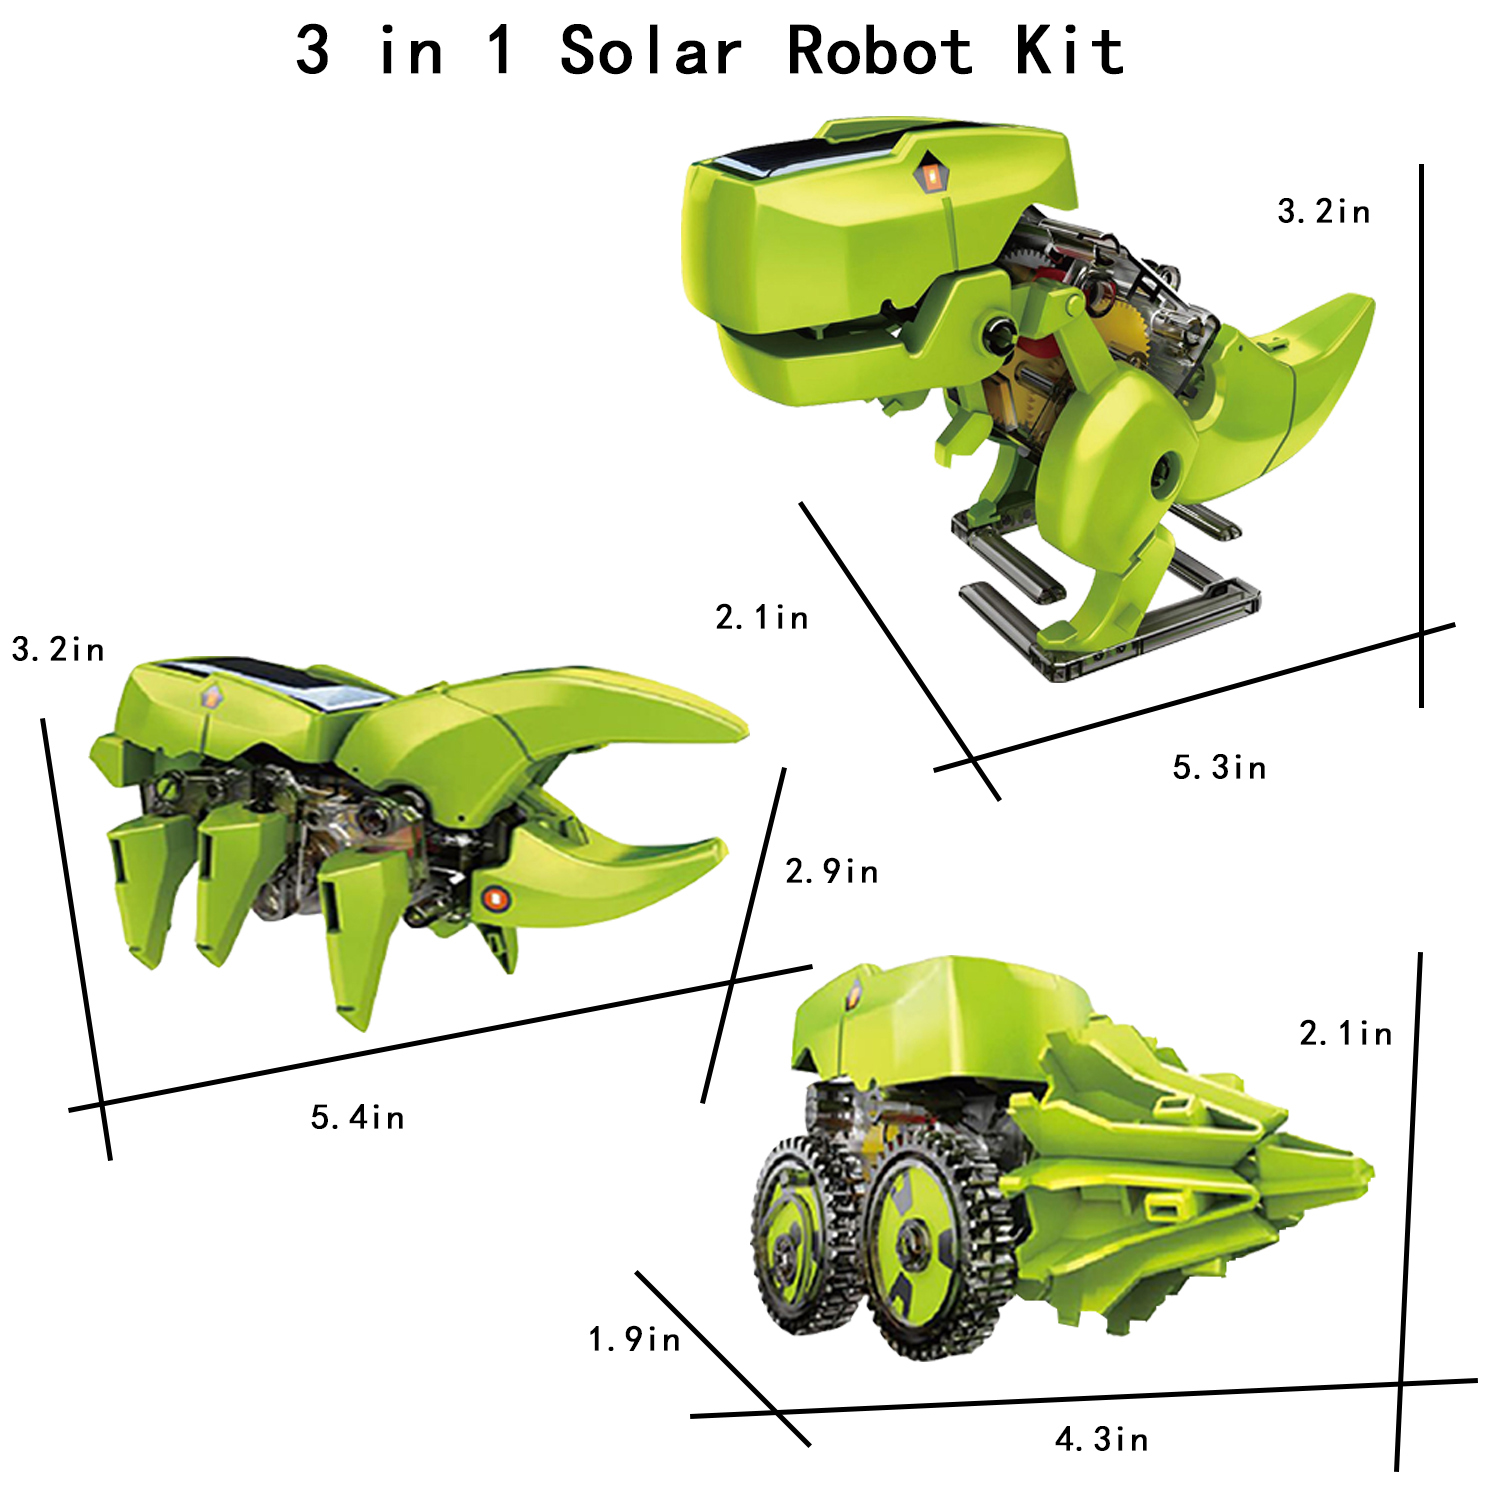 STEM Solar Robot Kit 3 in 1 Educational Learning Science DIY Building Dinosaurs Toys Gift for Kids Age 8-12